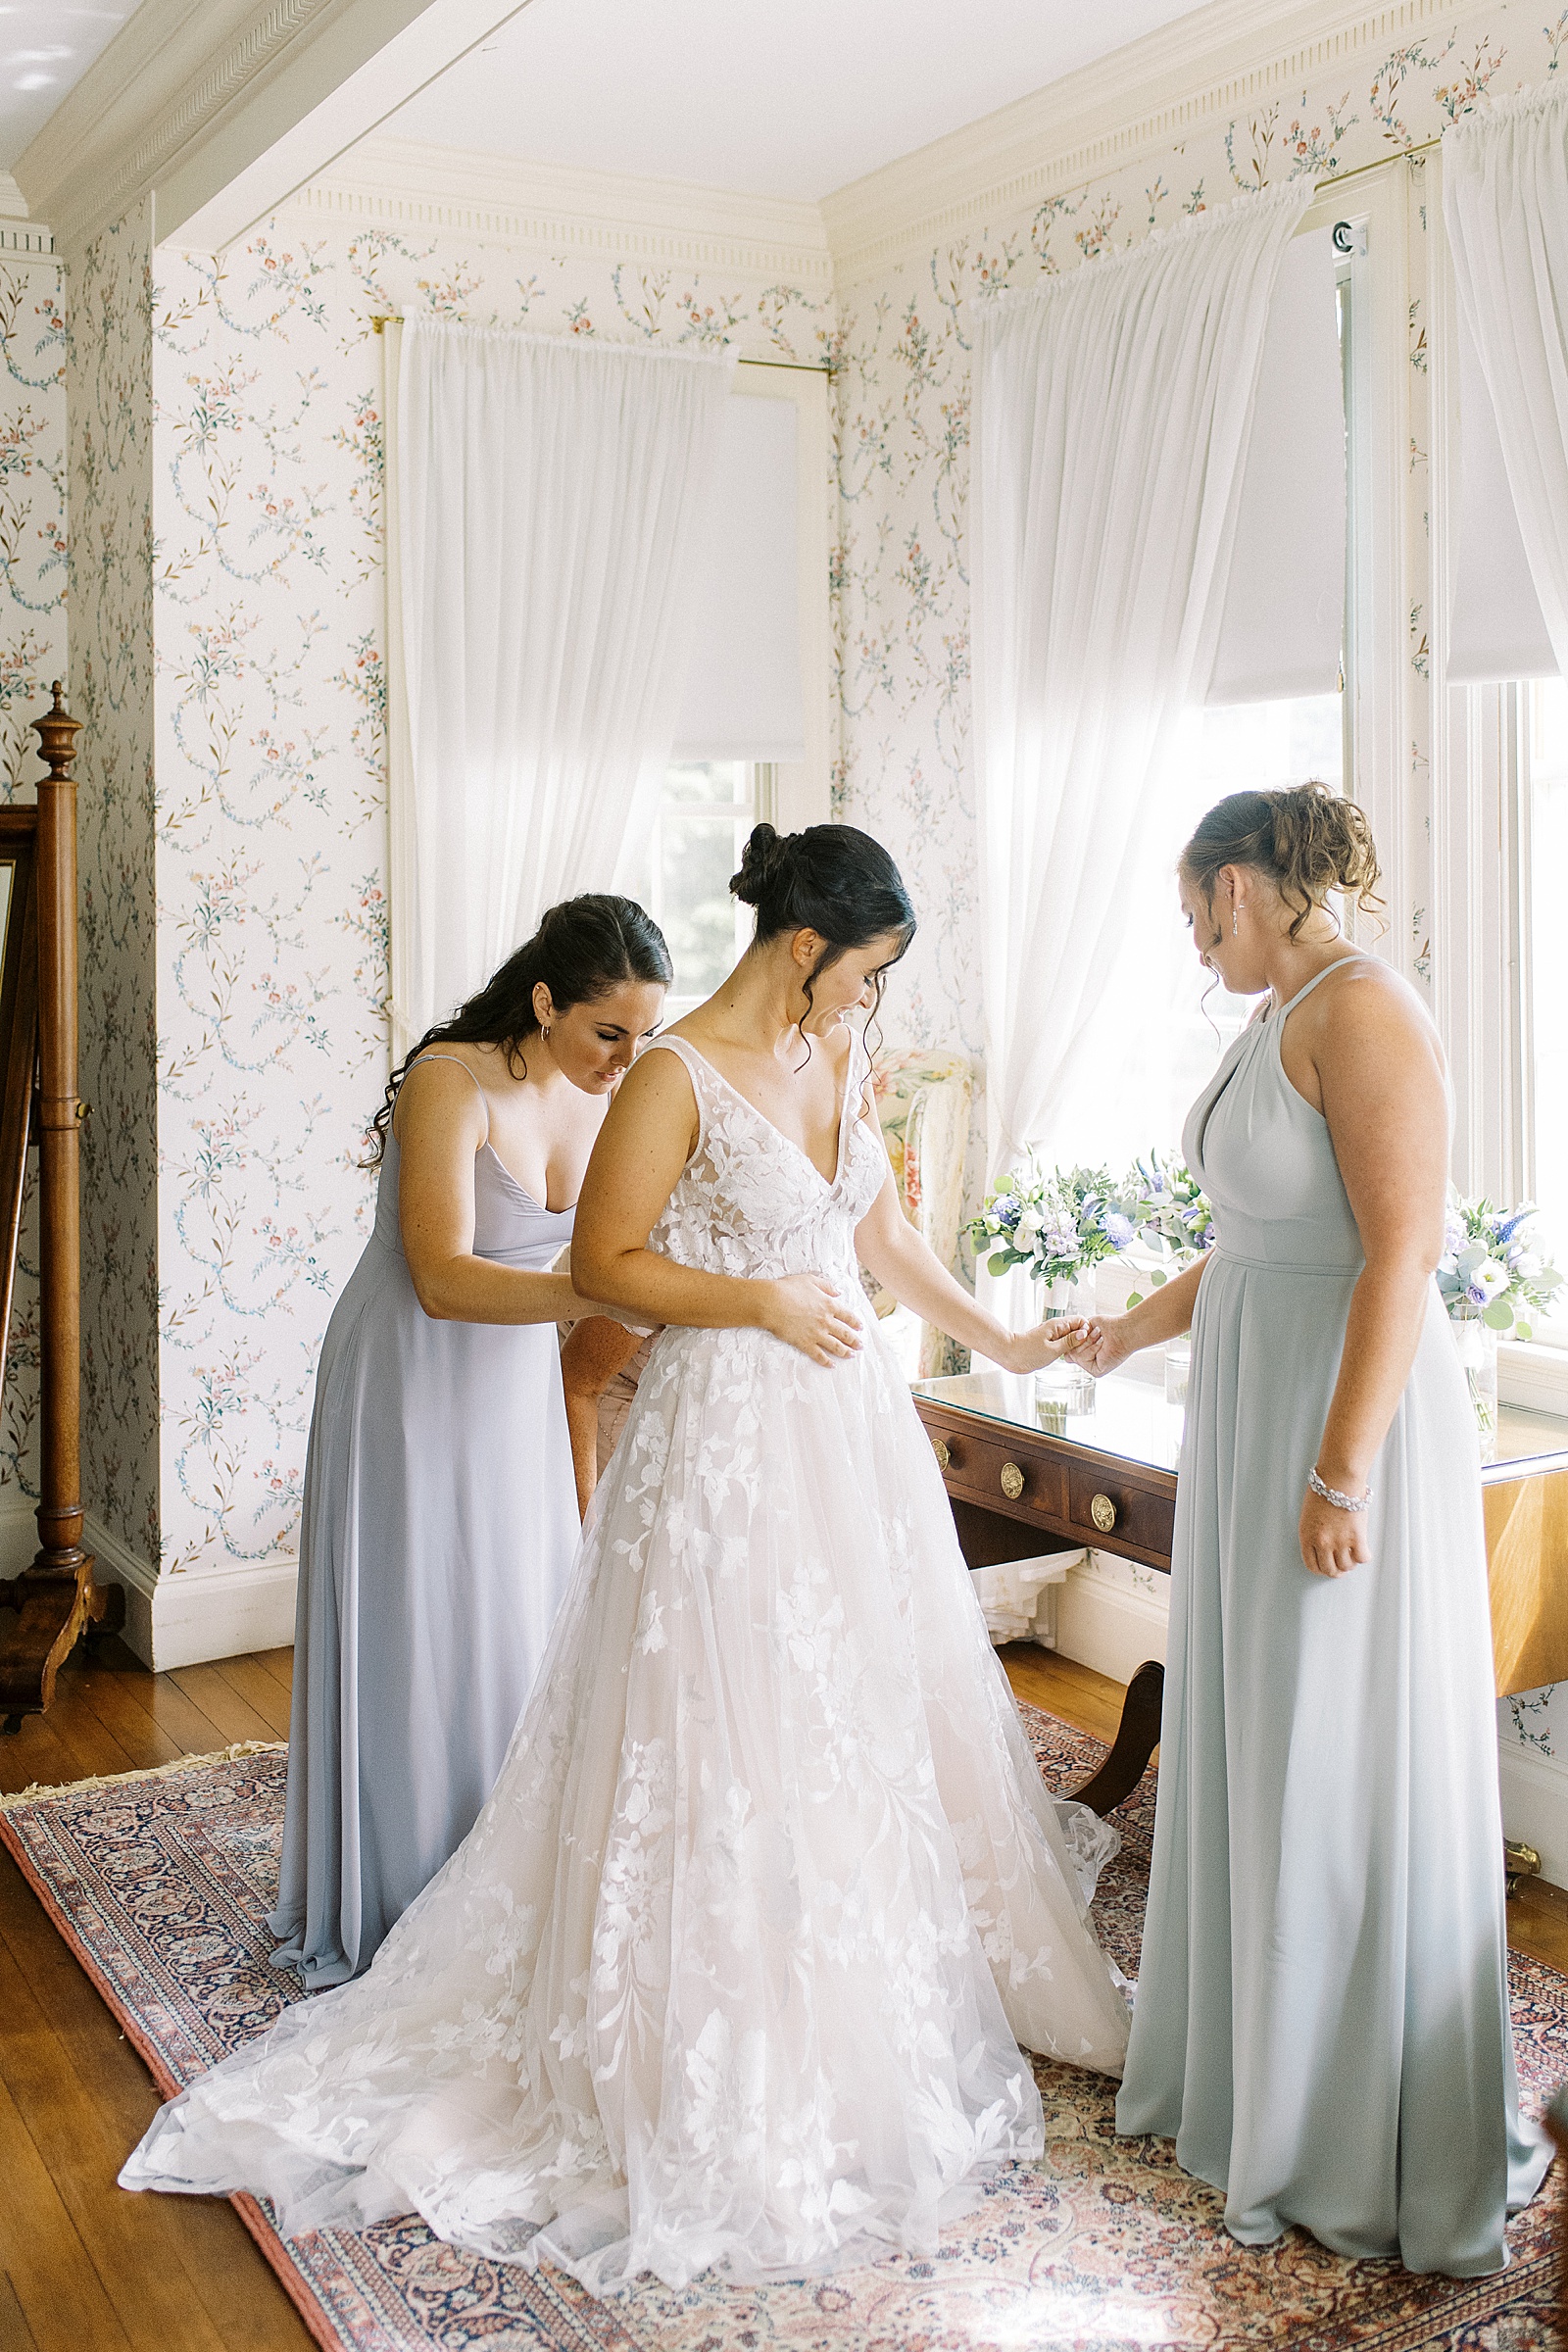 Bride getting ready with her bridesmaids at The Lyman Estate.